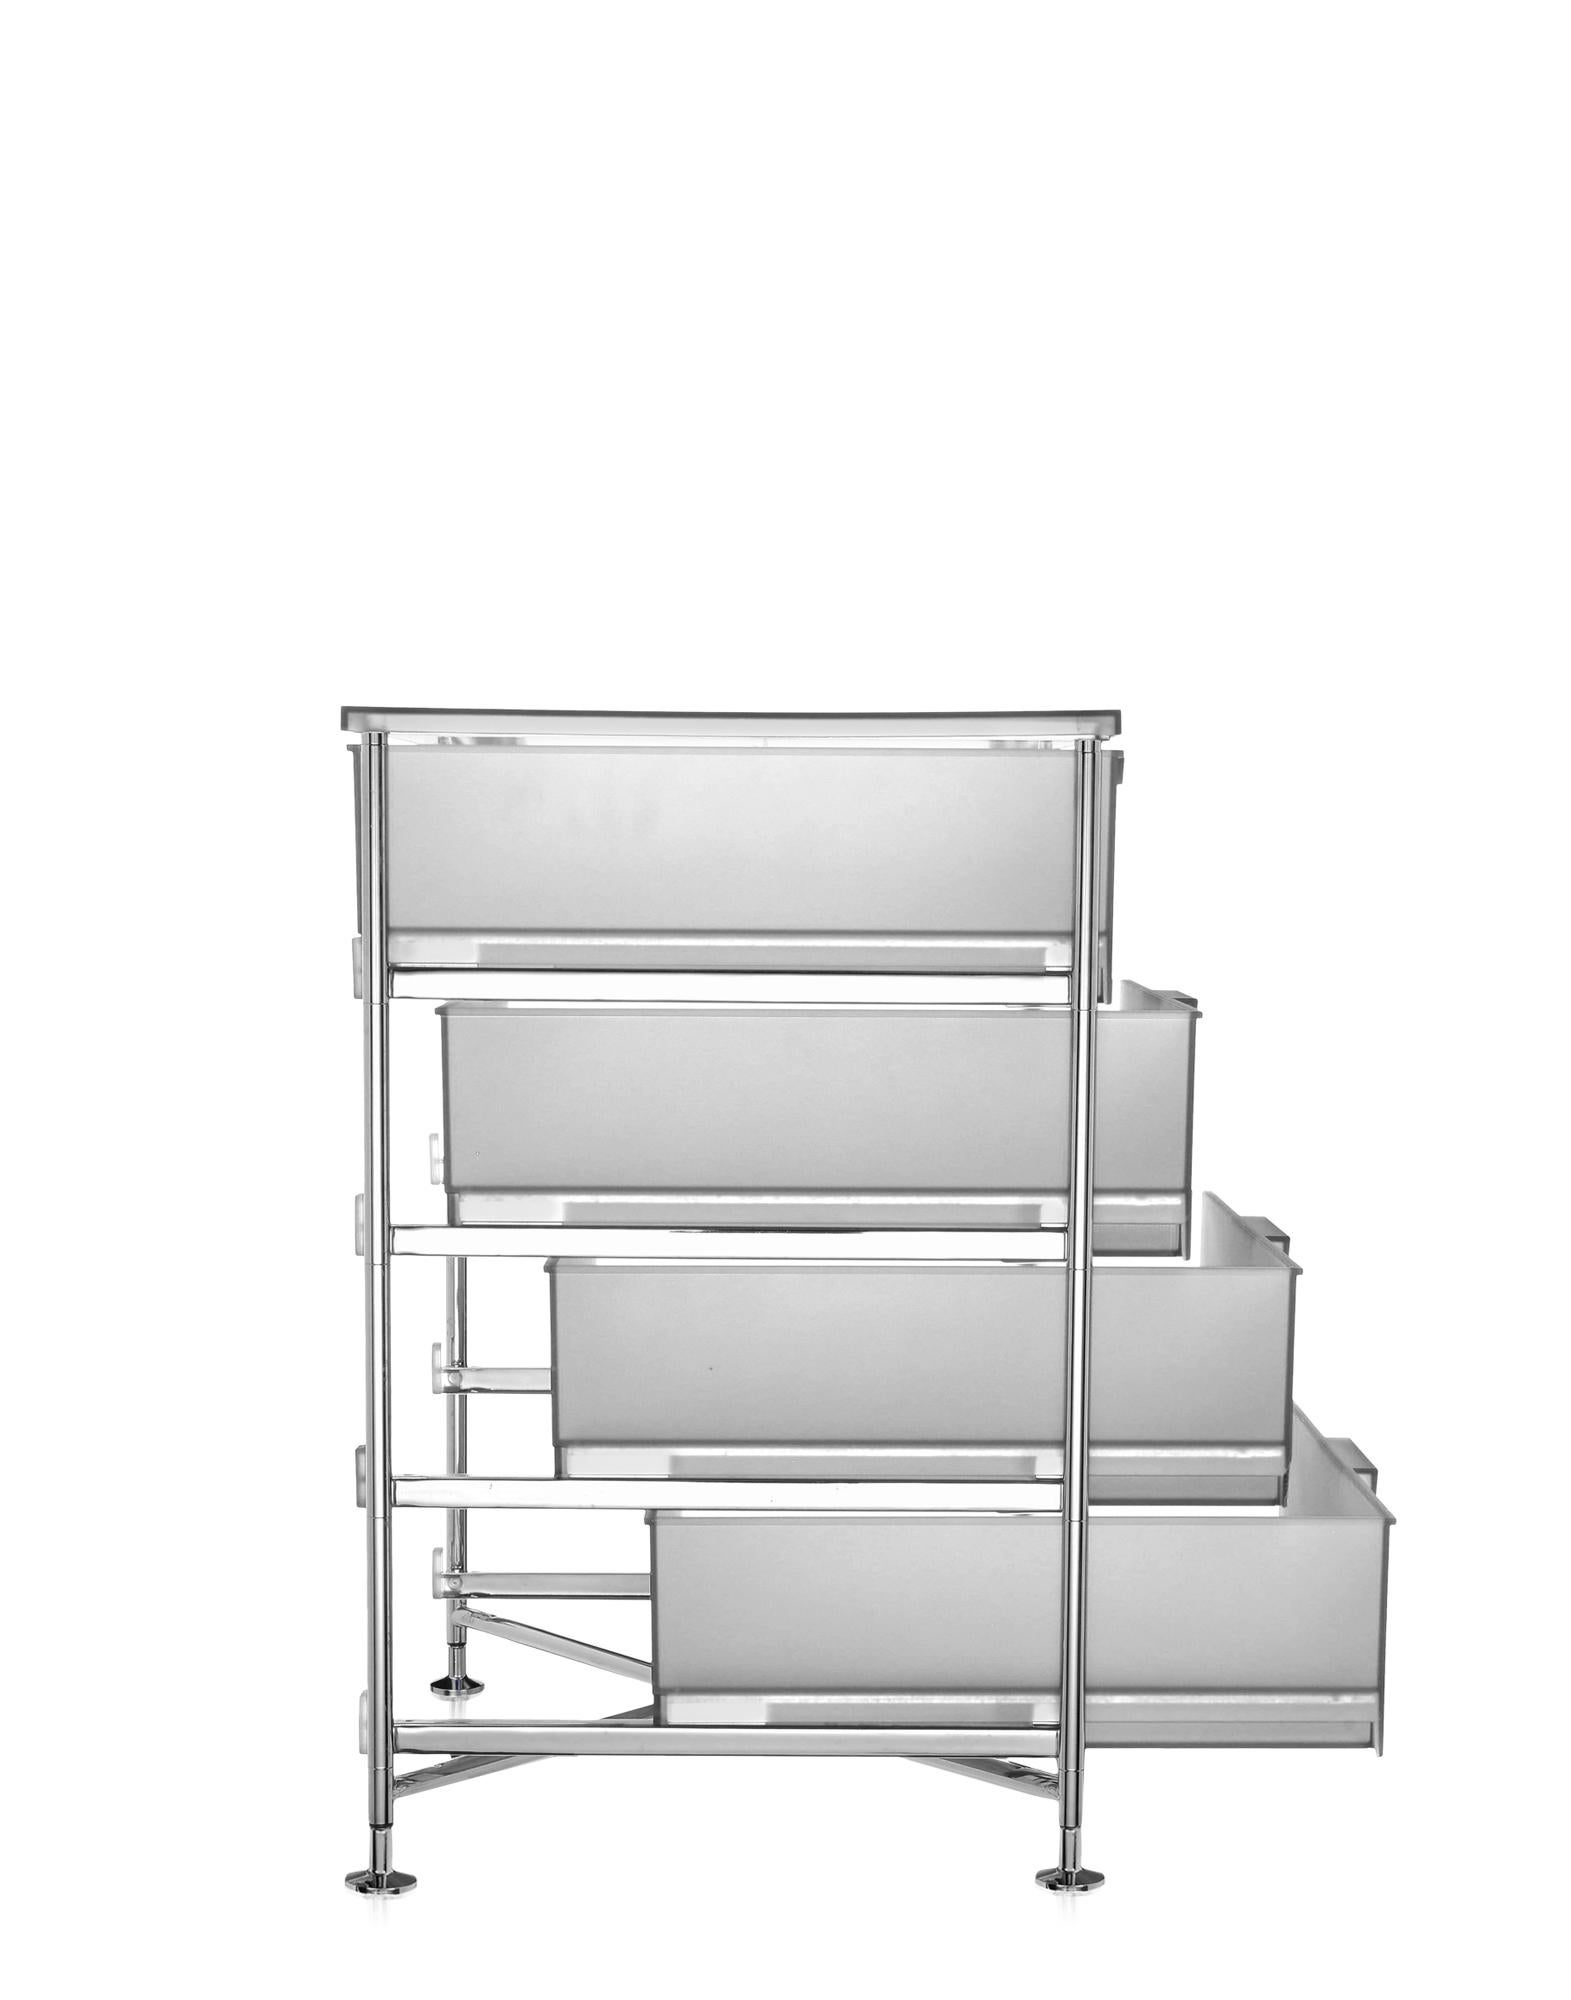 Mobil is a system of storage units that can be used throughout the home and office, for a variety of purposes. The basic element of the system is the drawer, alternated with intermediate shelves and tops. Mobil can be a simple chest of drawers,